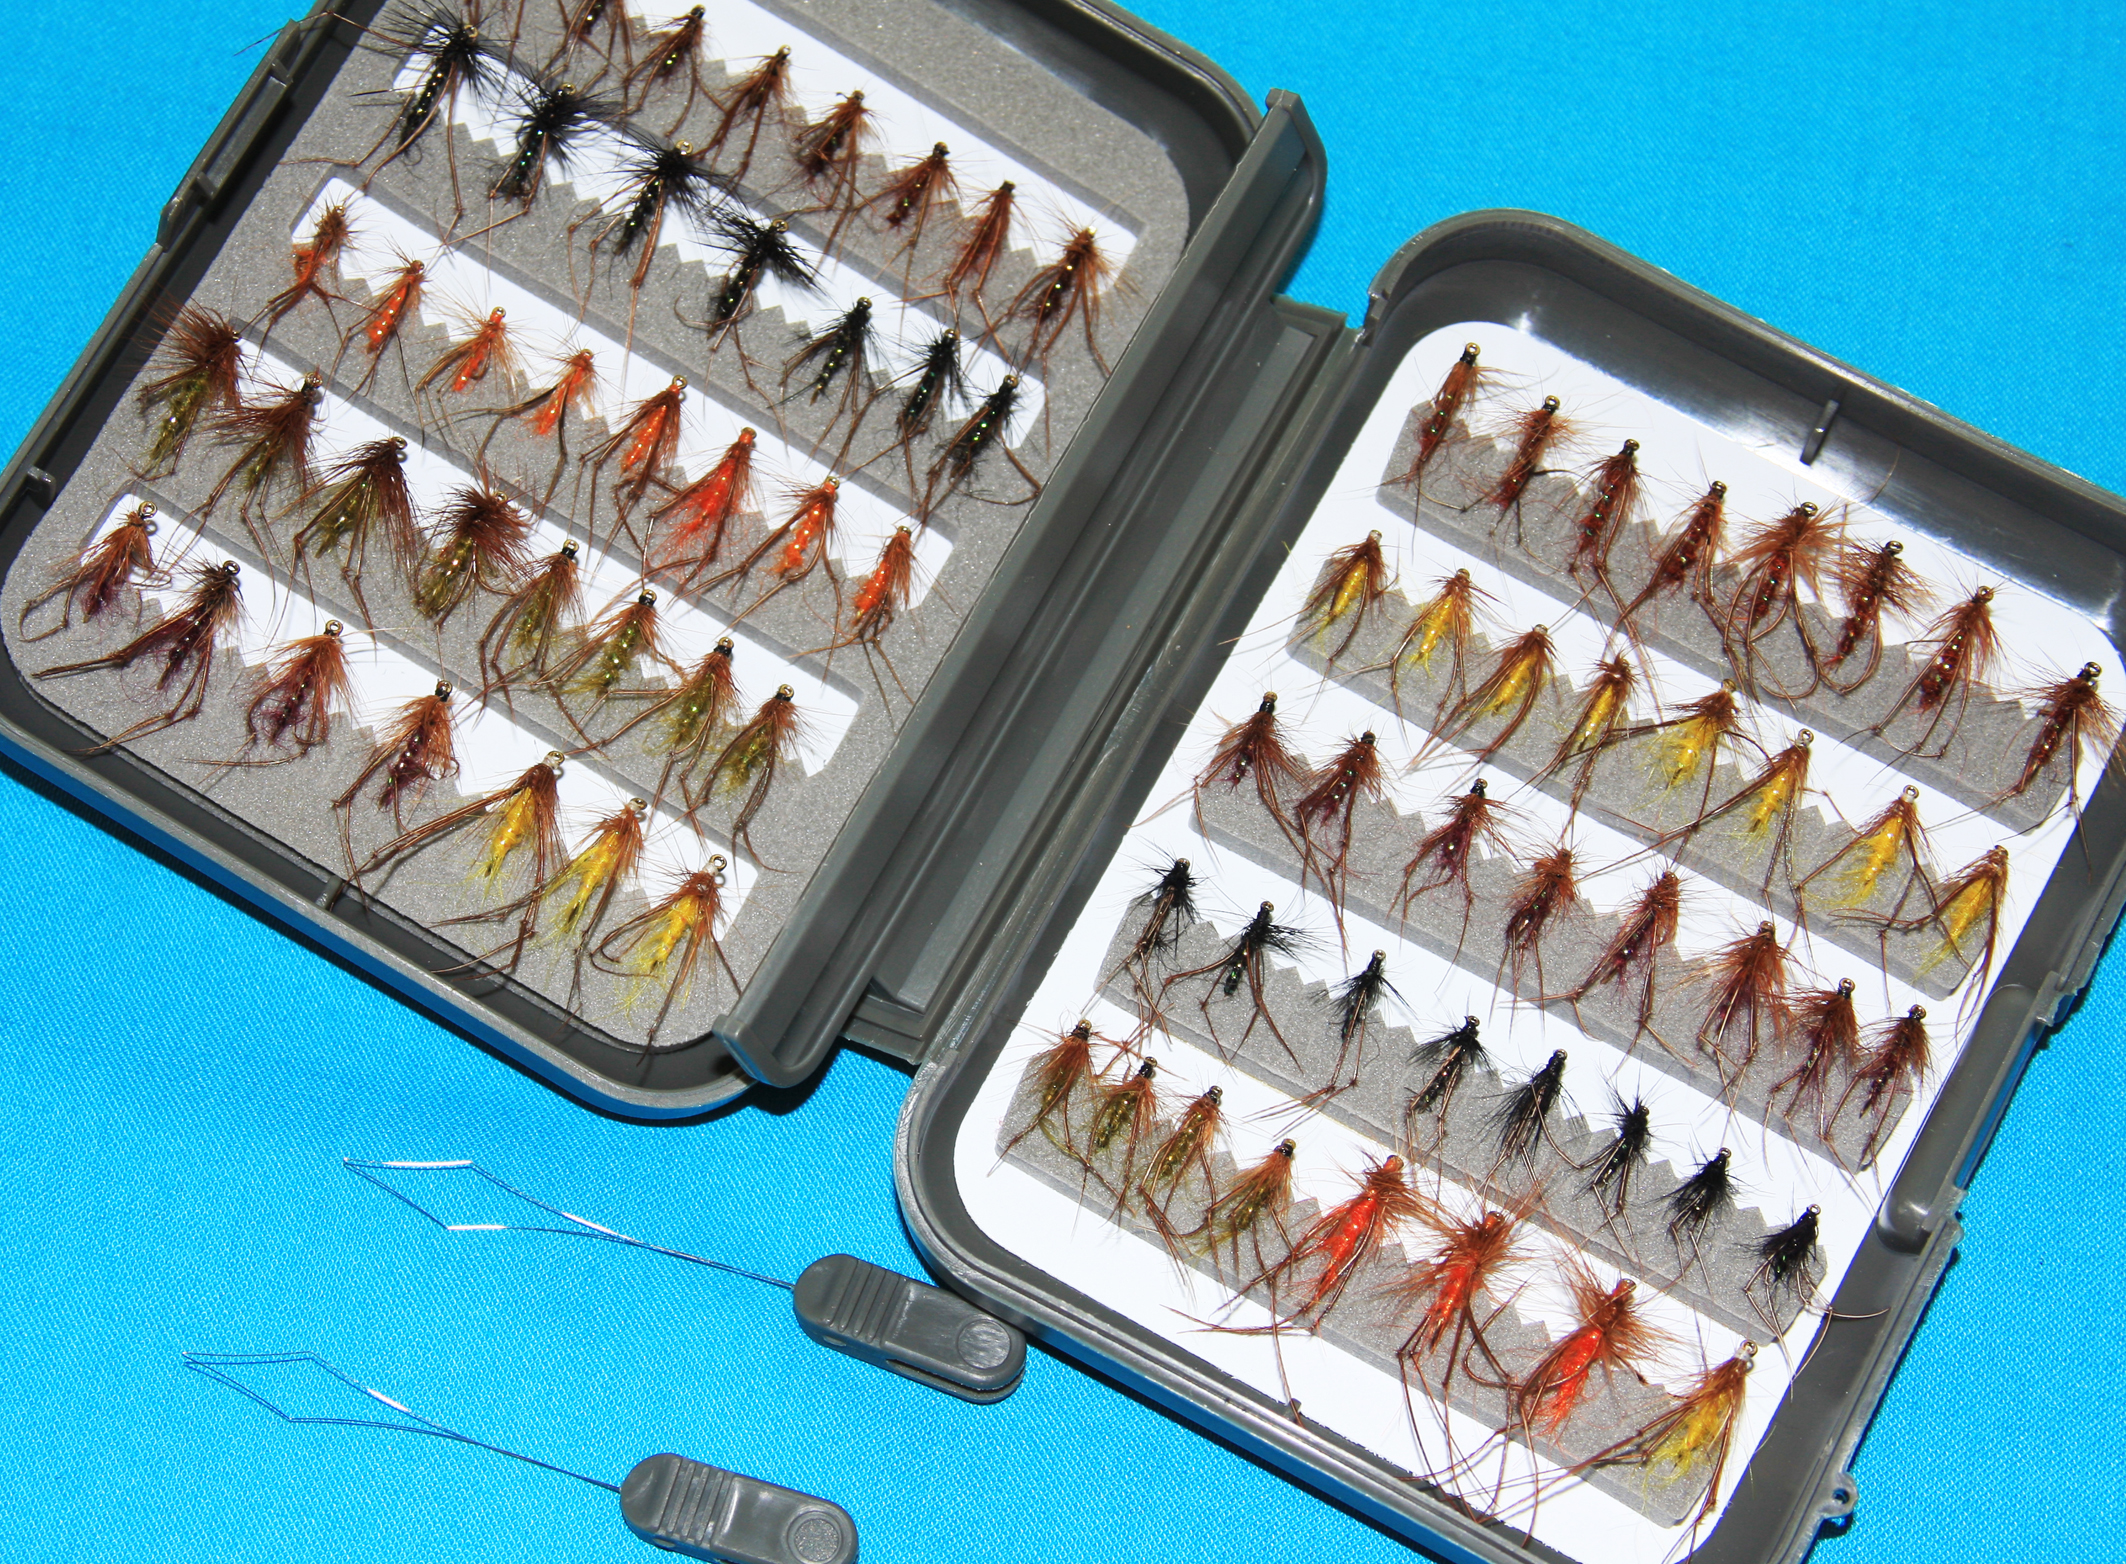 Hopper Selection In Fly Box